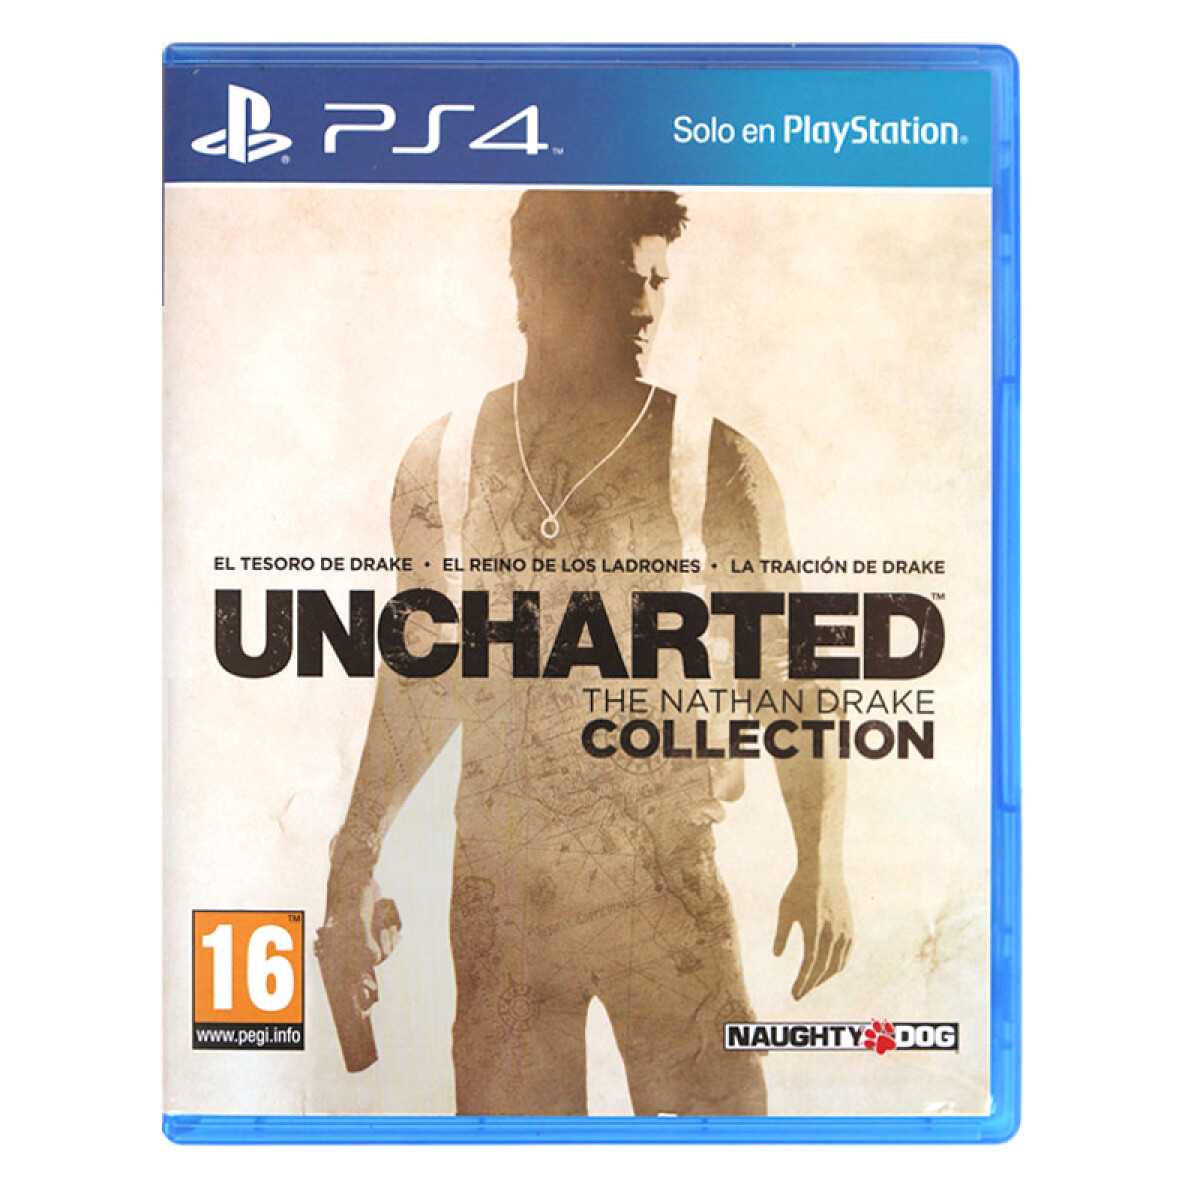 Juego Para PS4 Uncharted The Nathan Drake Collection - Unica 